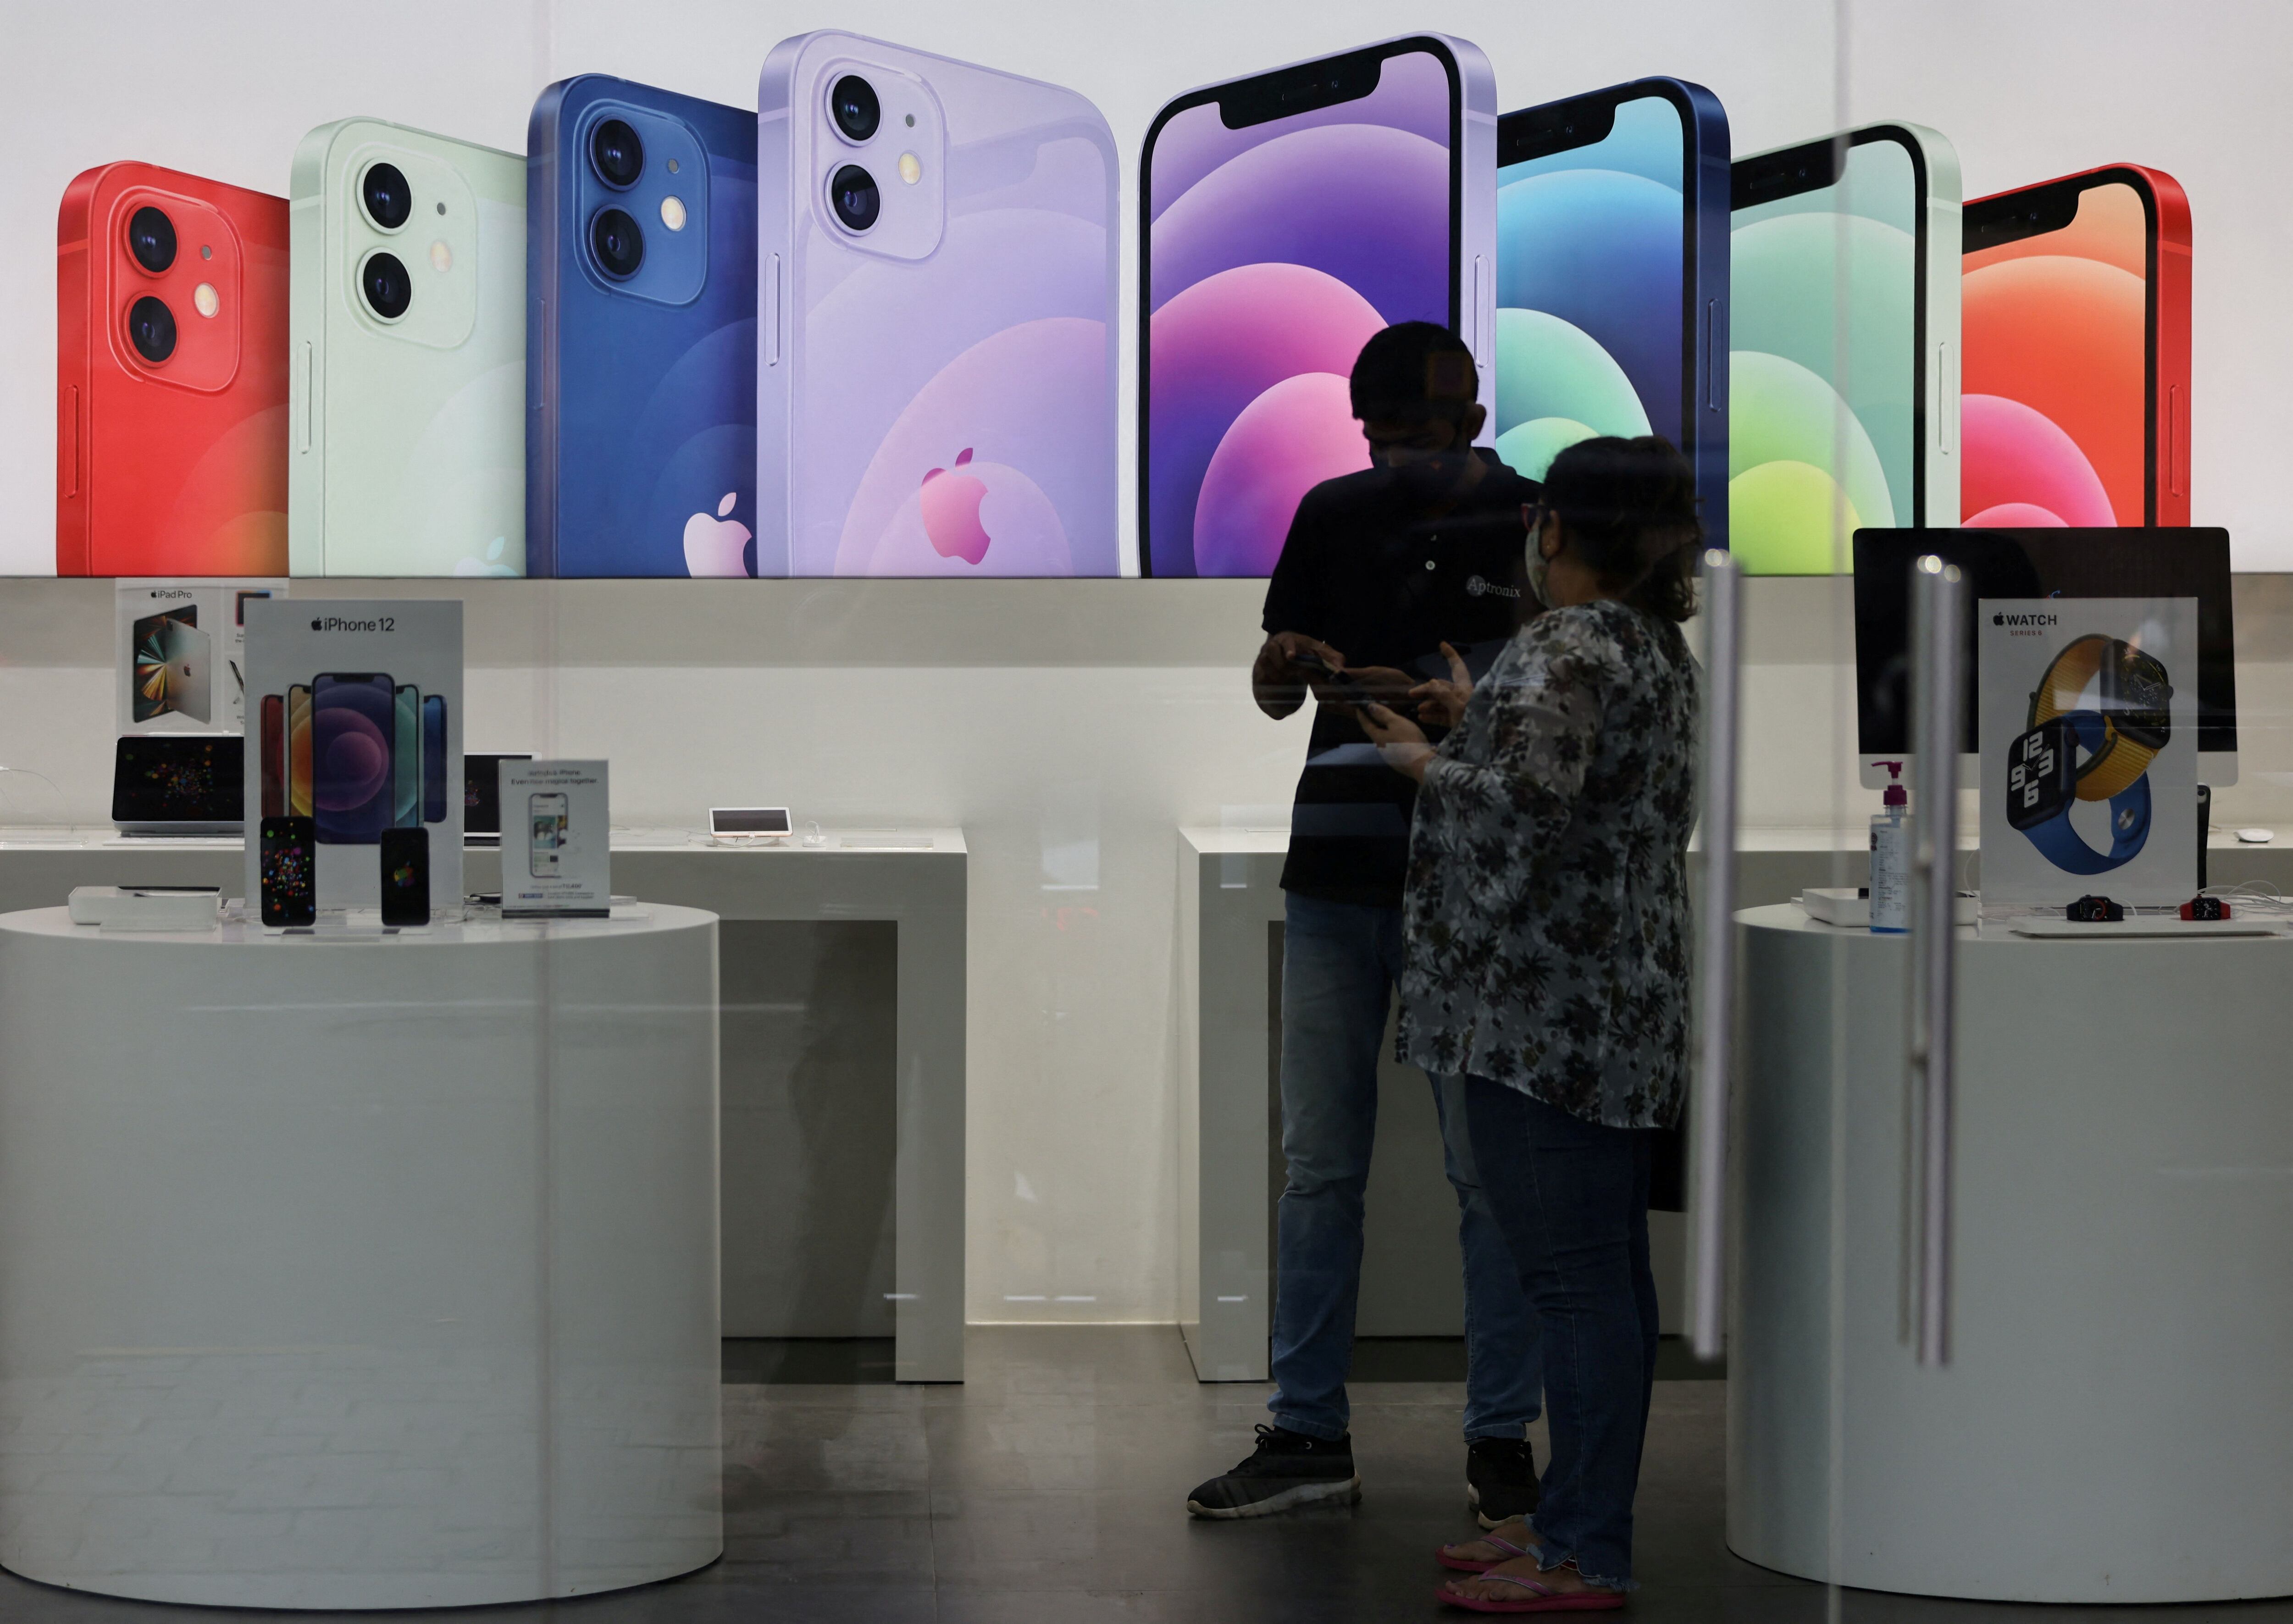 100 Apple stores opening in India with Tata Group partnership